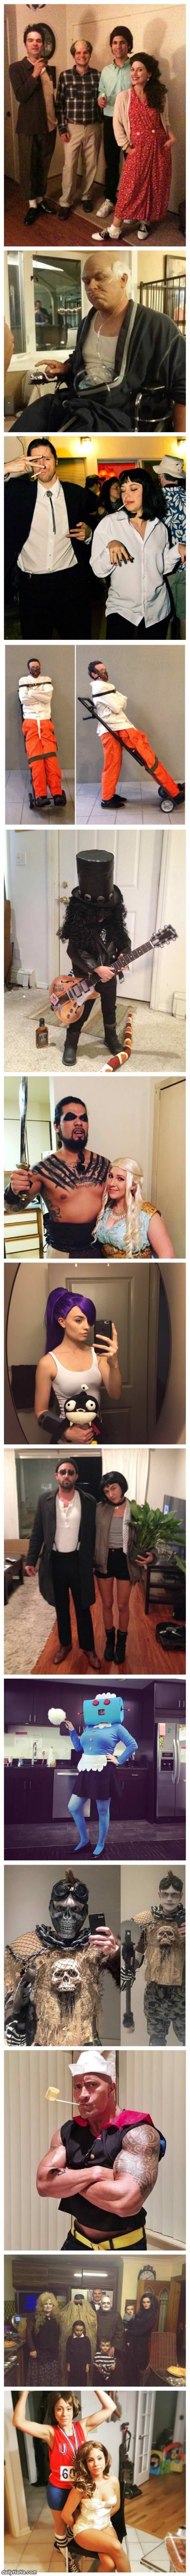 more fun halloween costumes 2016 funny picture